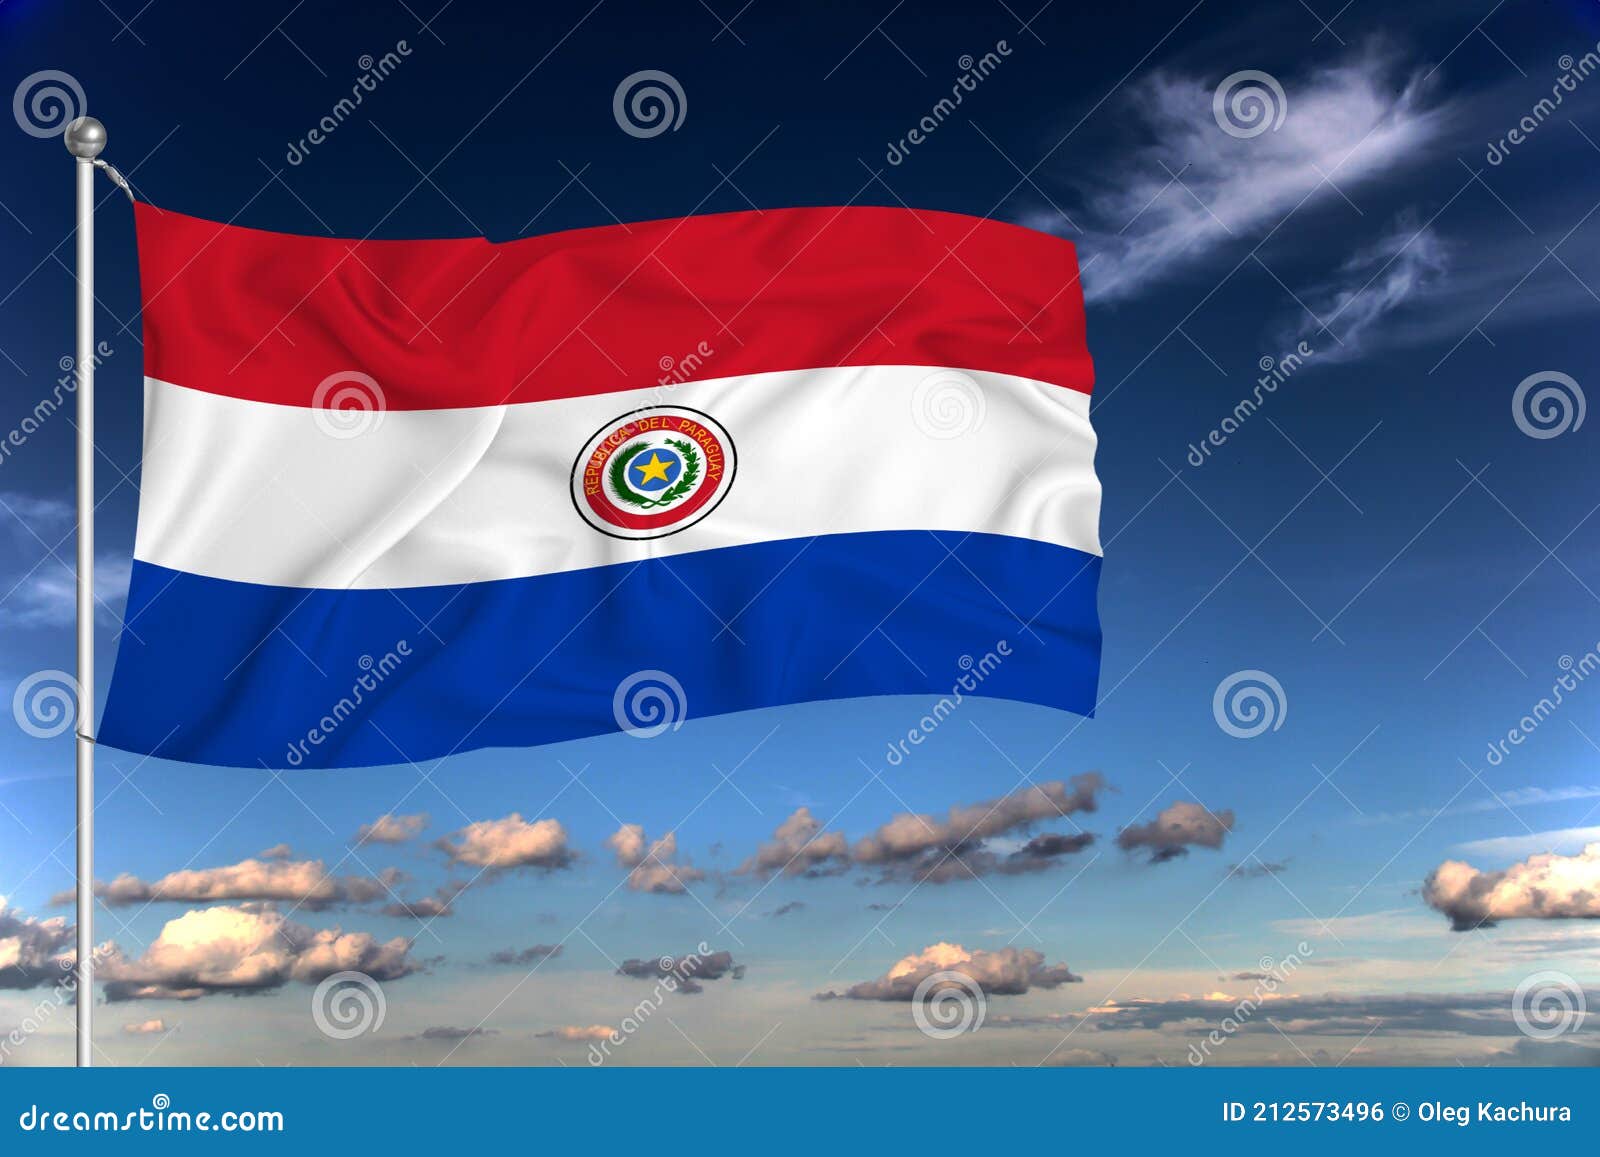 paraguai national flag waving in the wind against deep blue sky.  international relations concept